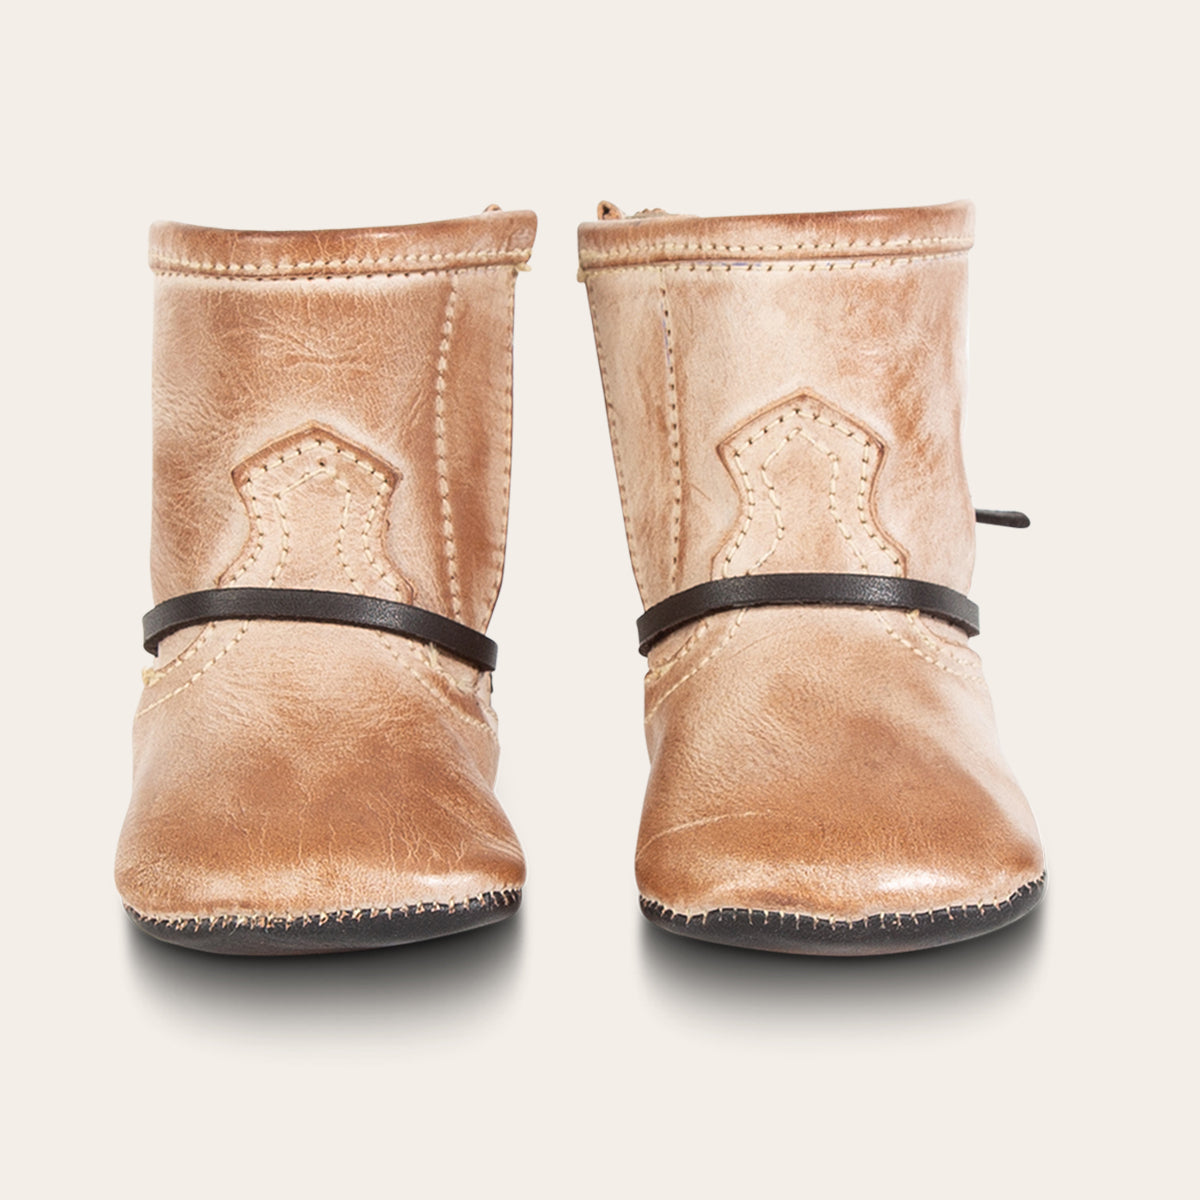 front view showing contrasting front lace detailing on FREEBIRD infant baby coal taupe leather bootie  